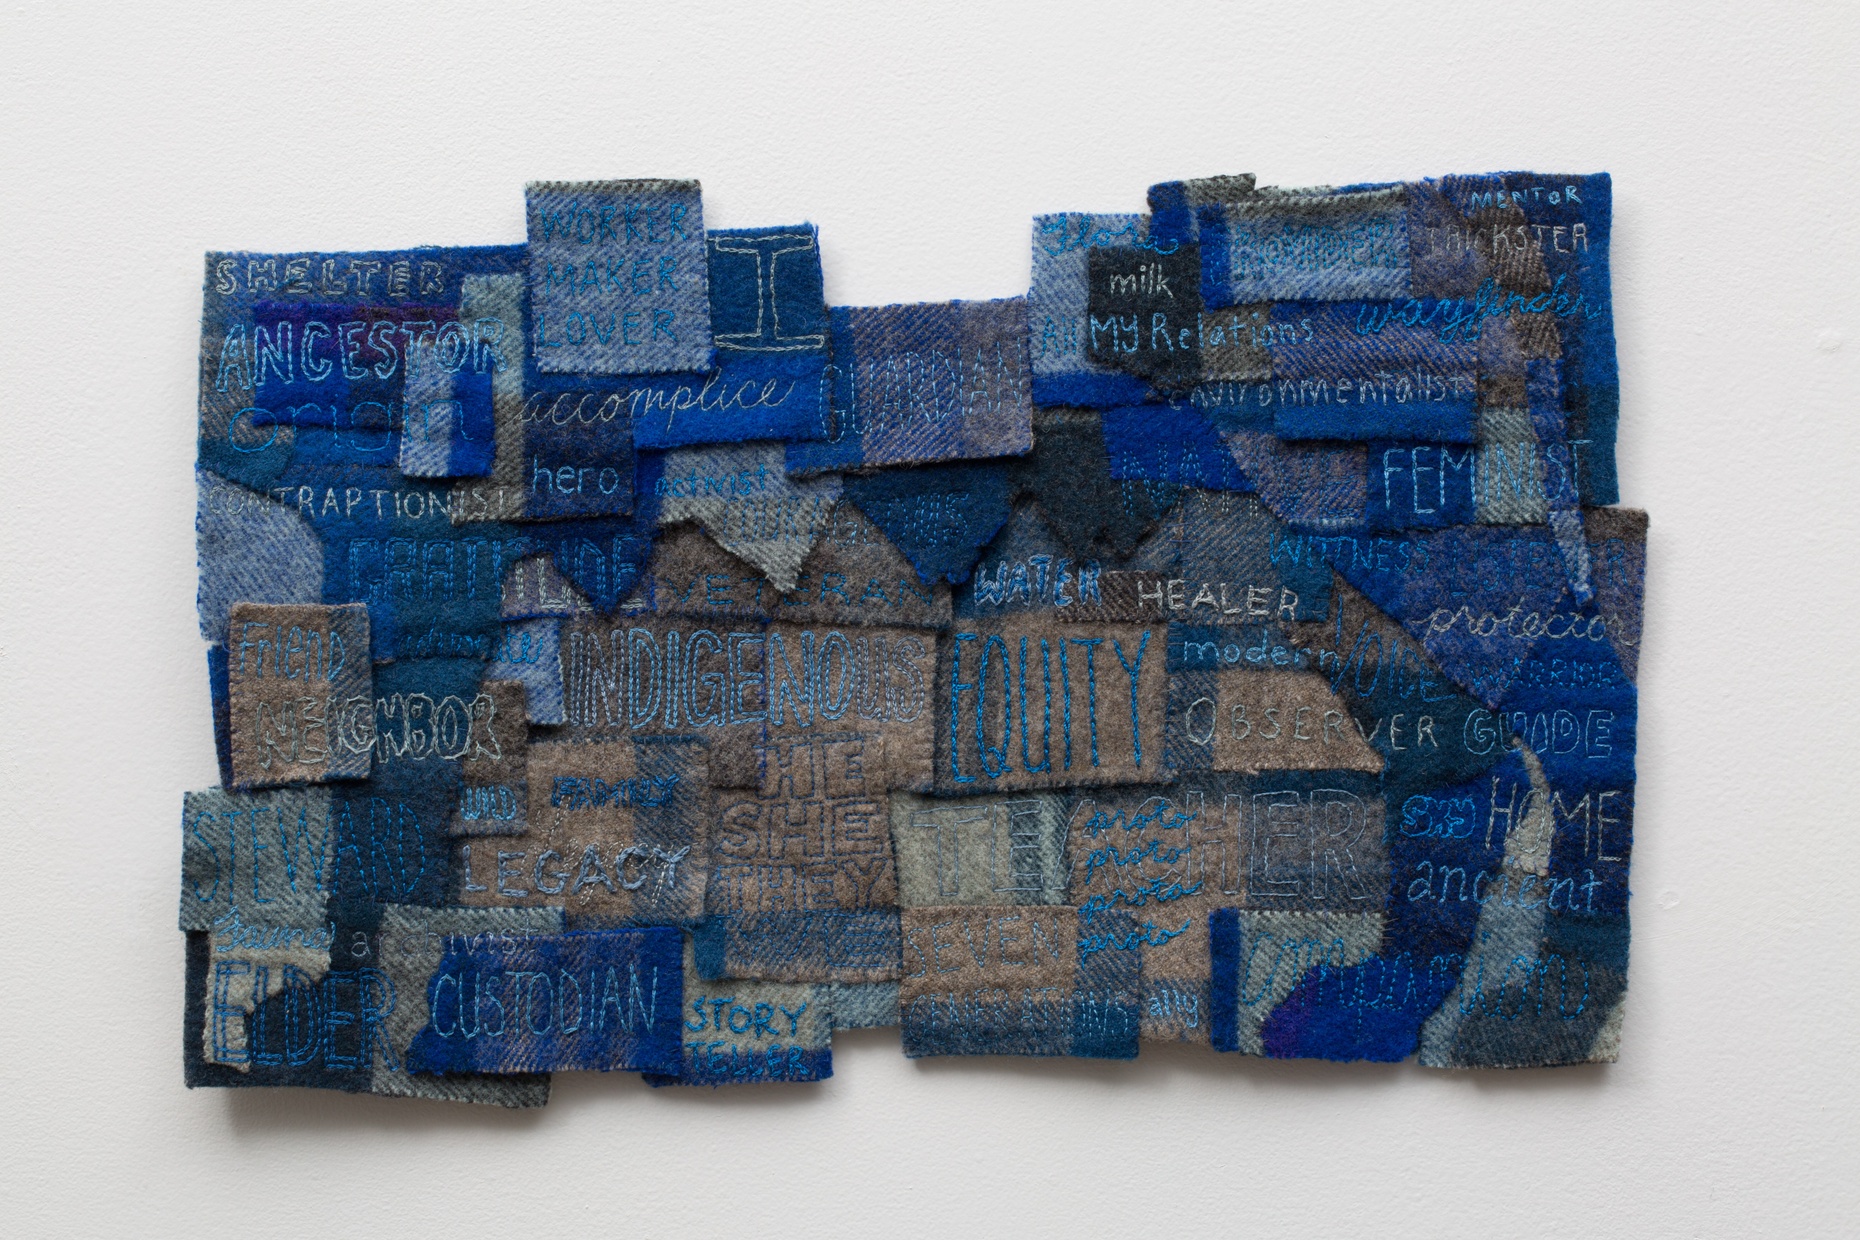 Squares of blue and brown fabric overlapping each other to make a large rectangle shape with words like "Indigenous," "equity," and "observe," embroidered on the squares.